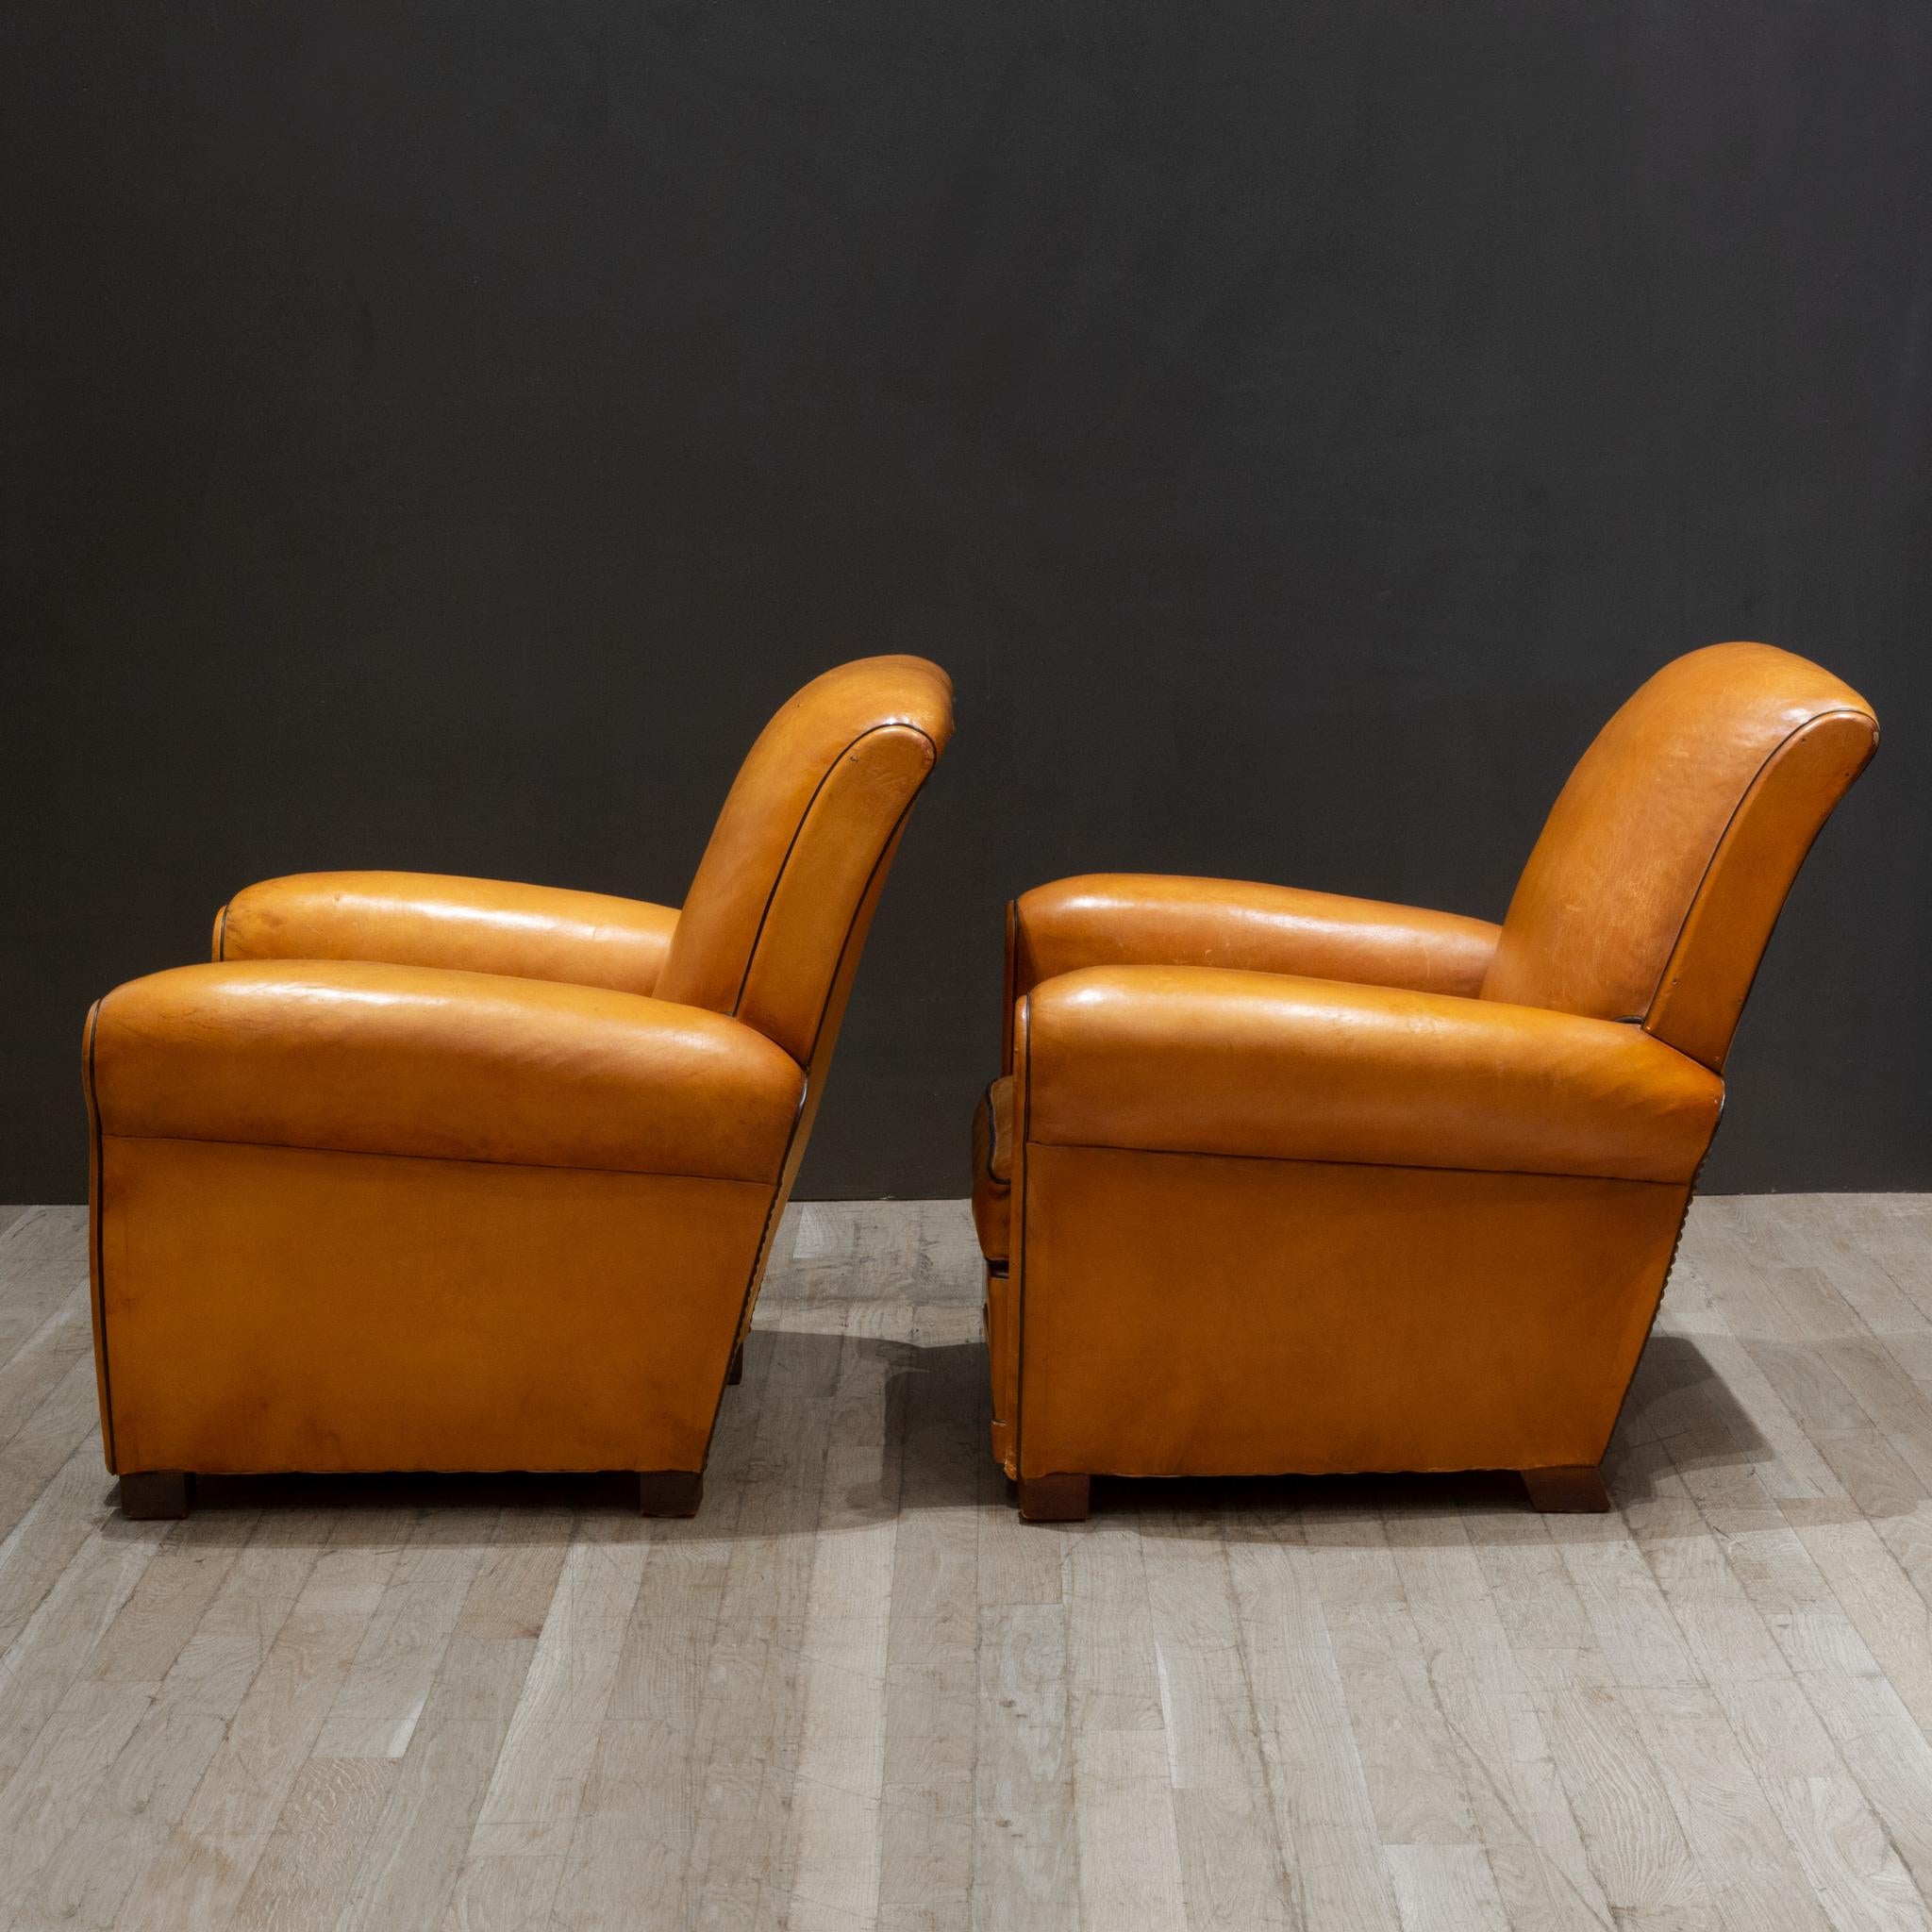 Metal Pair of French Slopeback Light Caramel Leather Club Chairs c.1930-1940 For Sale